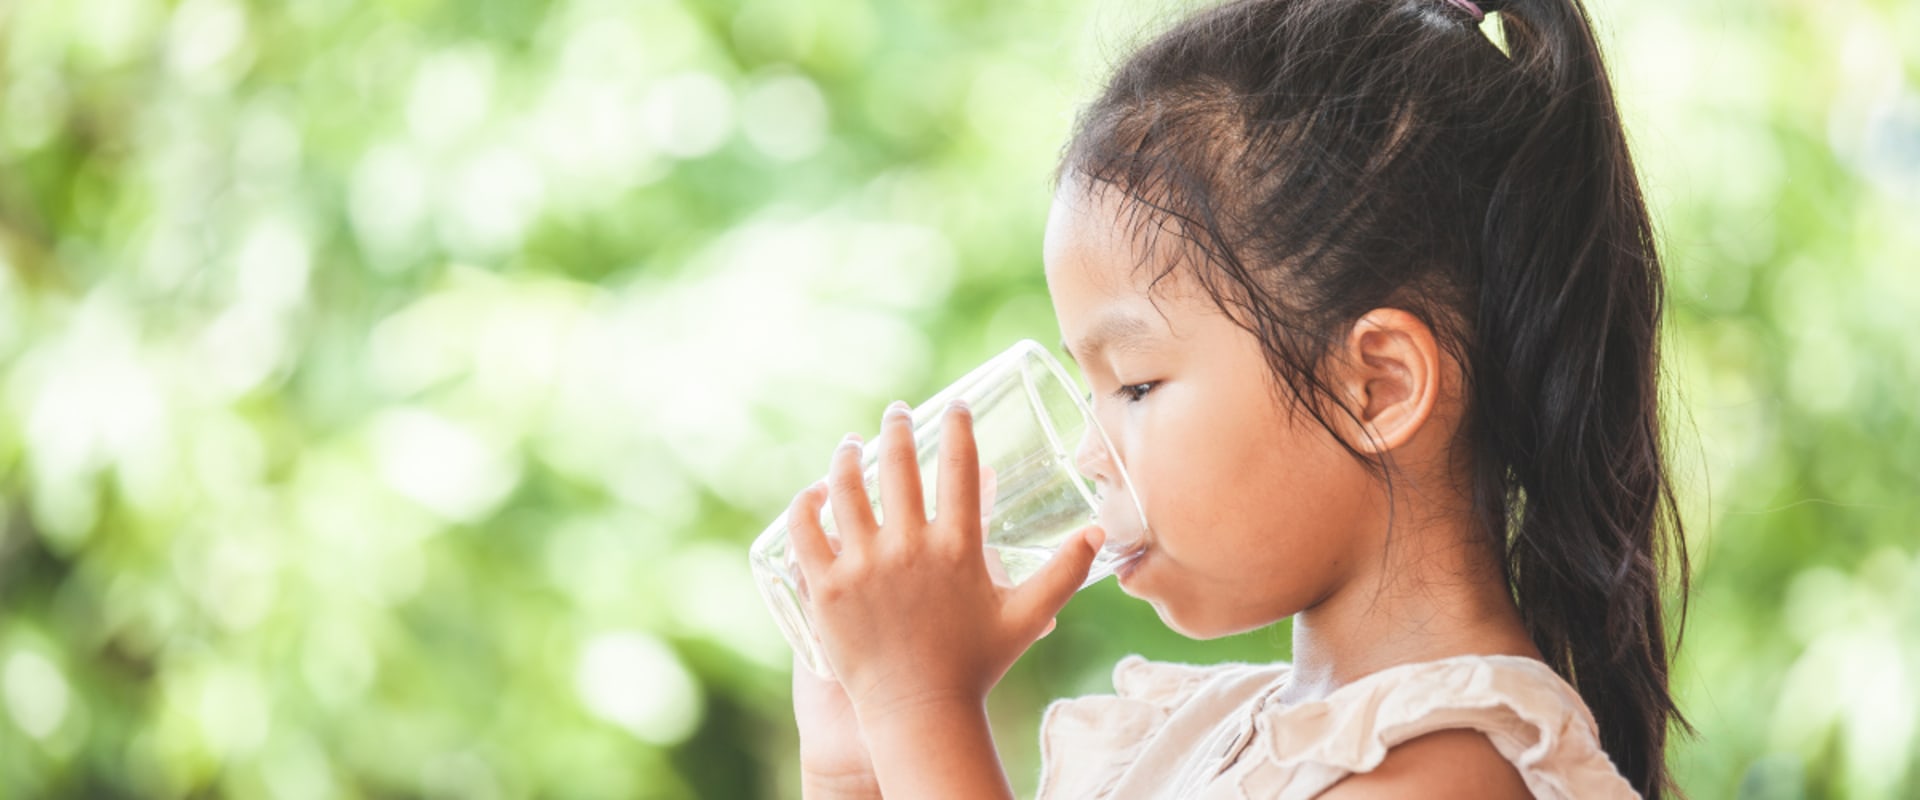 Protecting Children's Health: The Importance Of Child-Friendly Water Filters